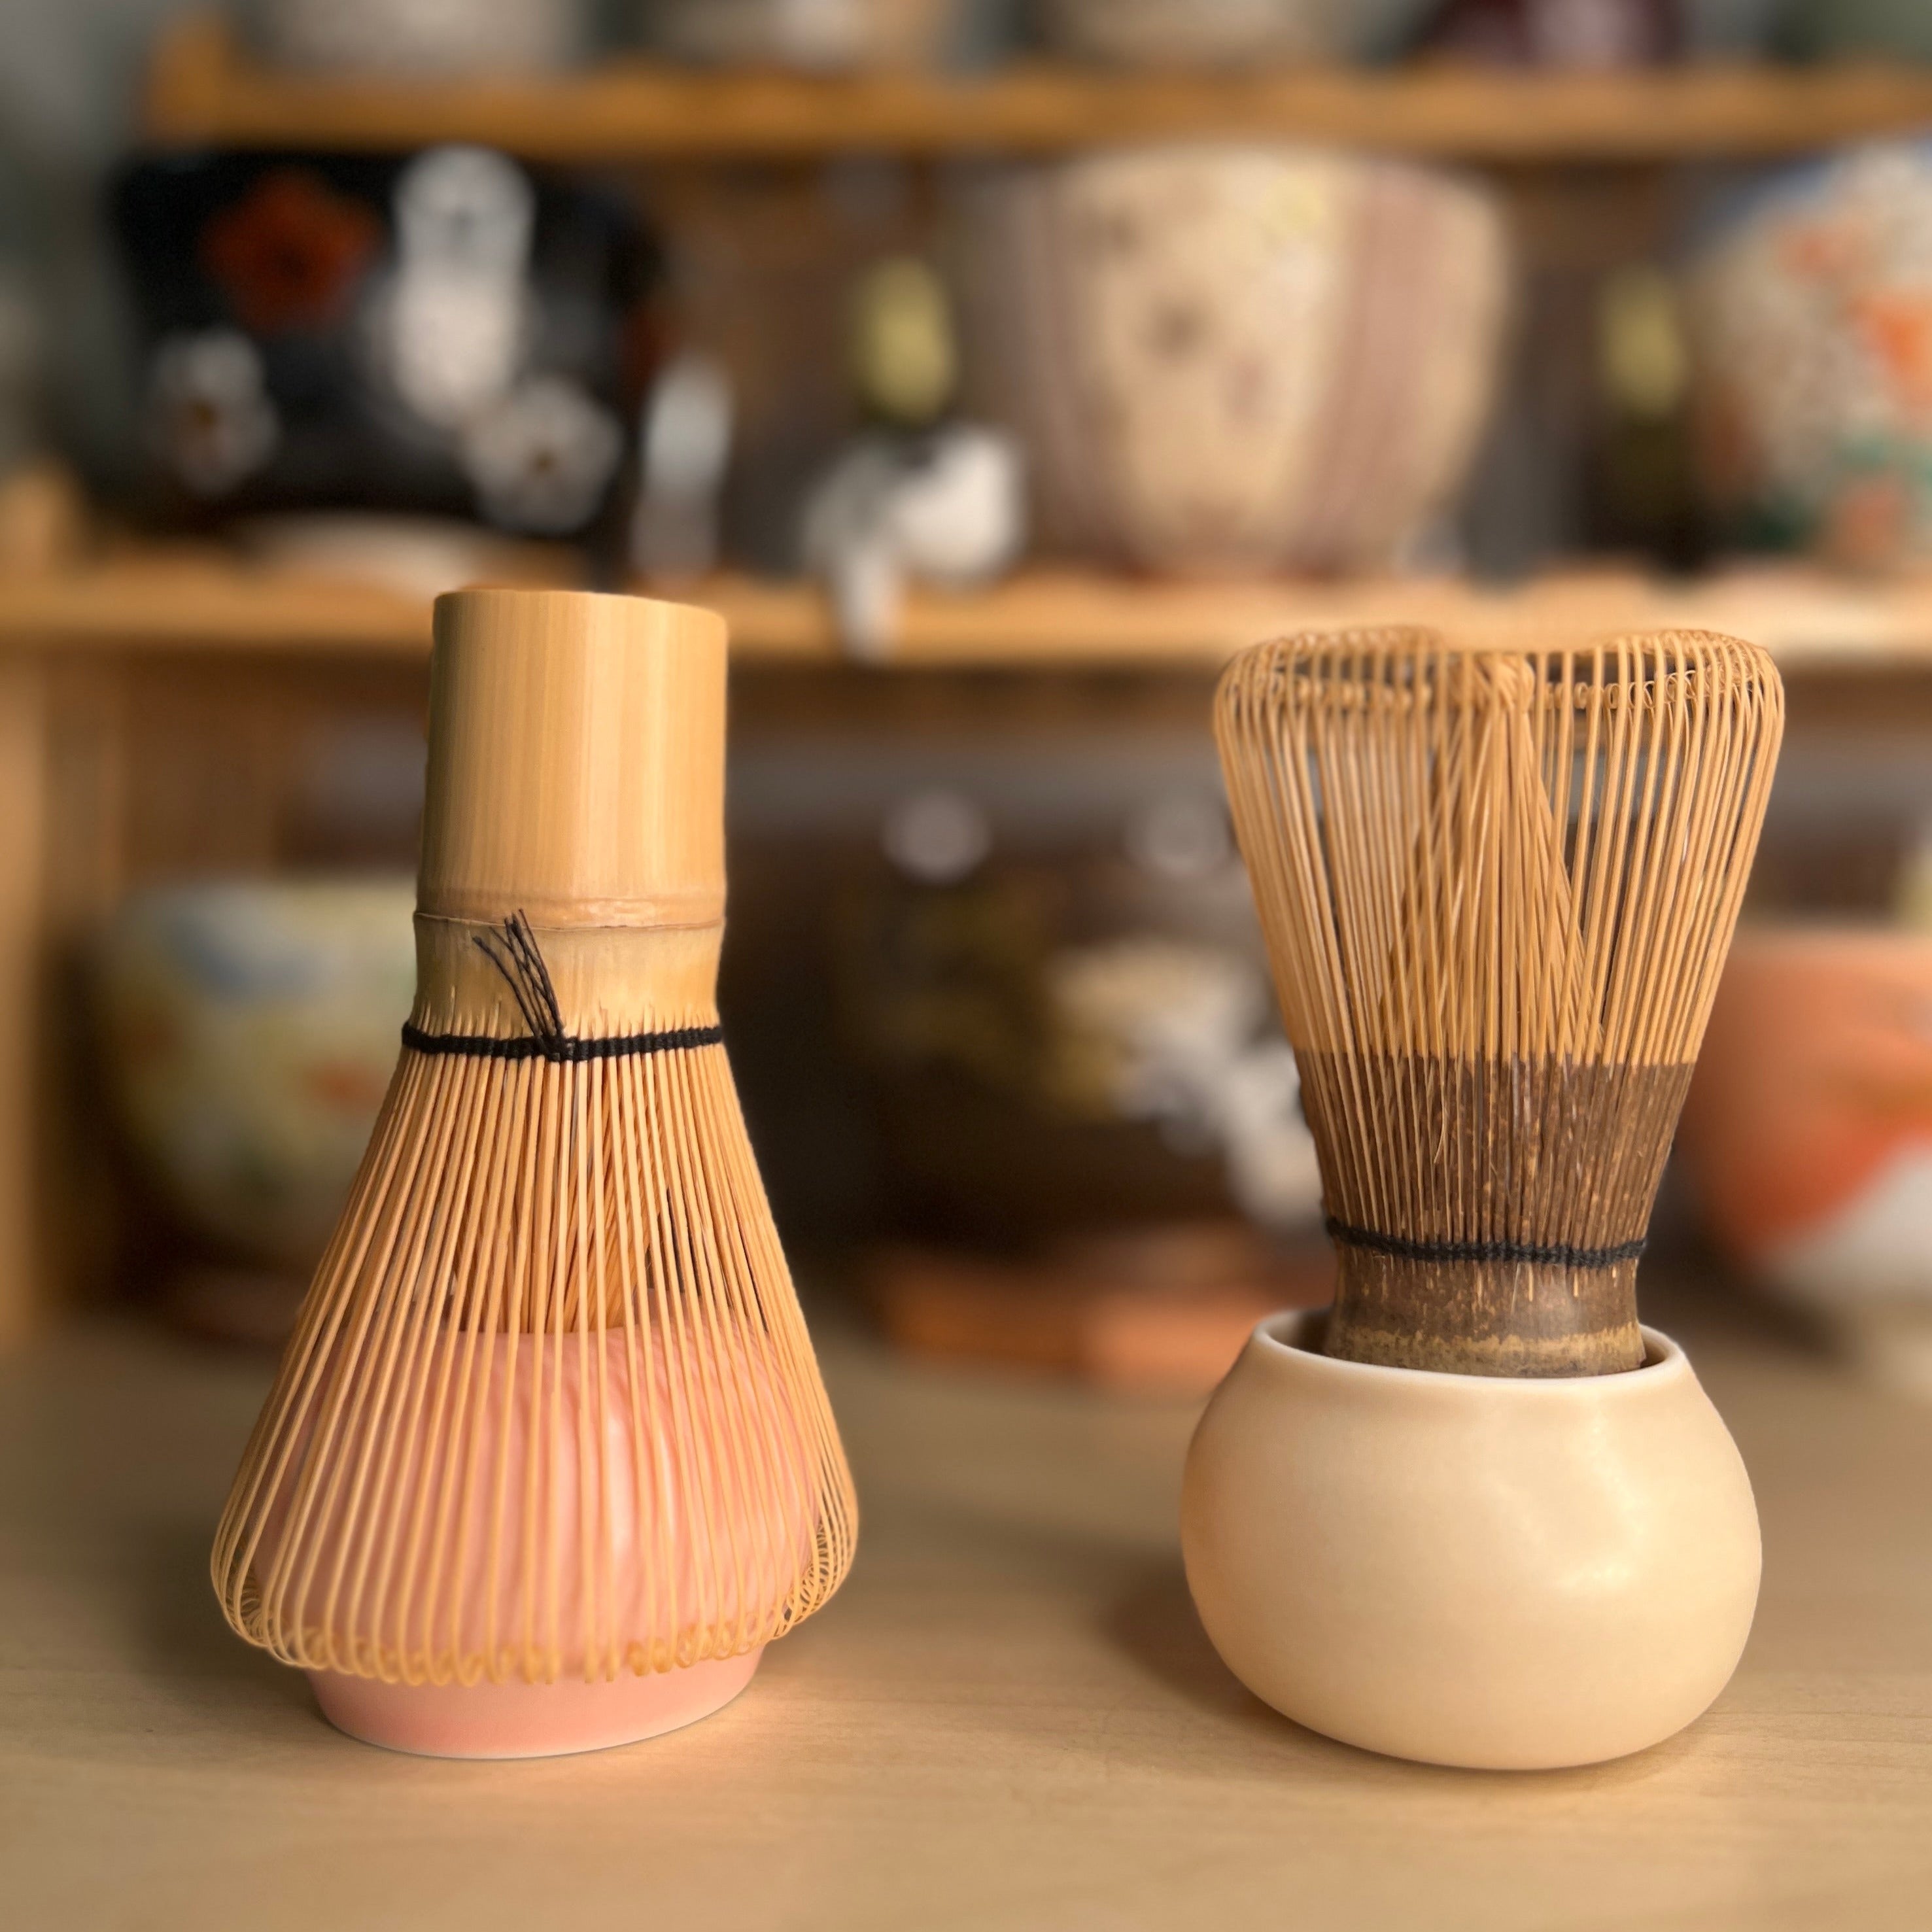 Chasen-tate Matcha Whisk Stand (New Design - Made In Japan)